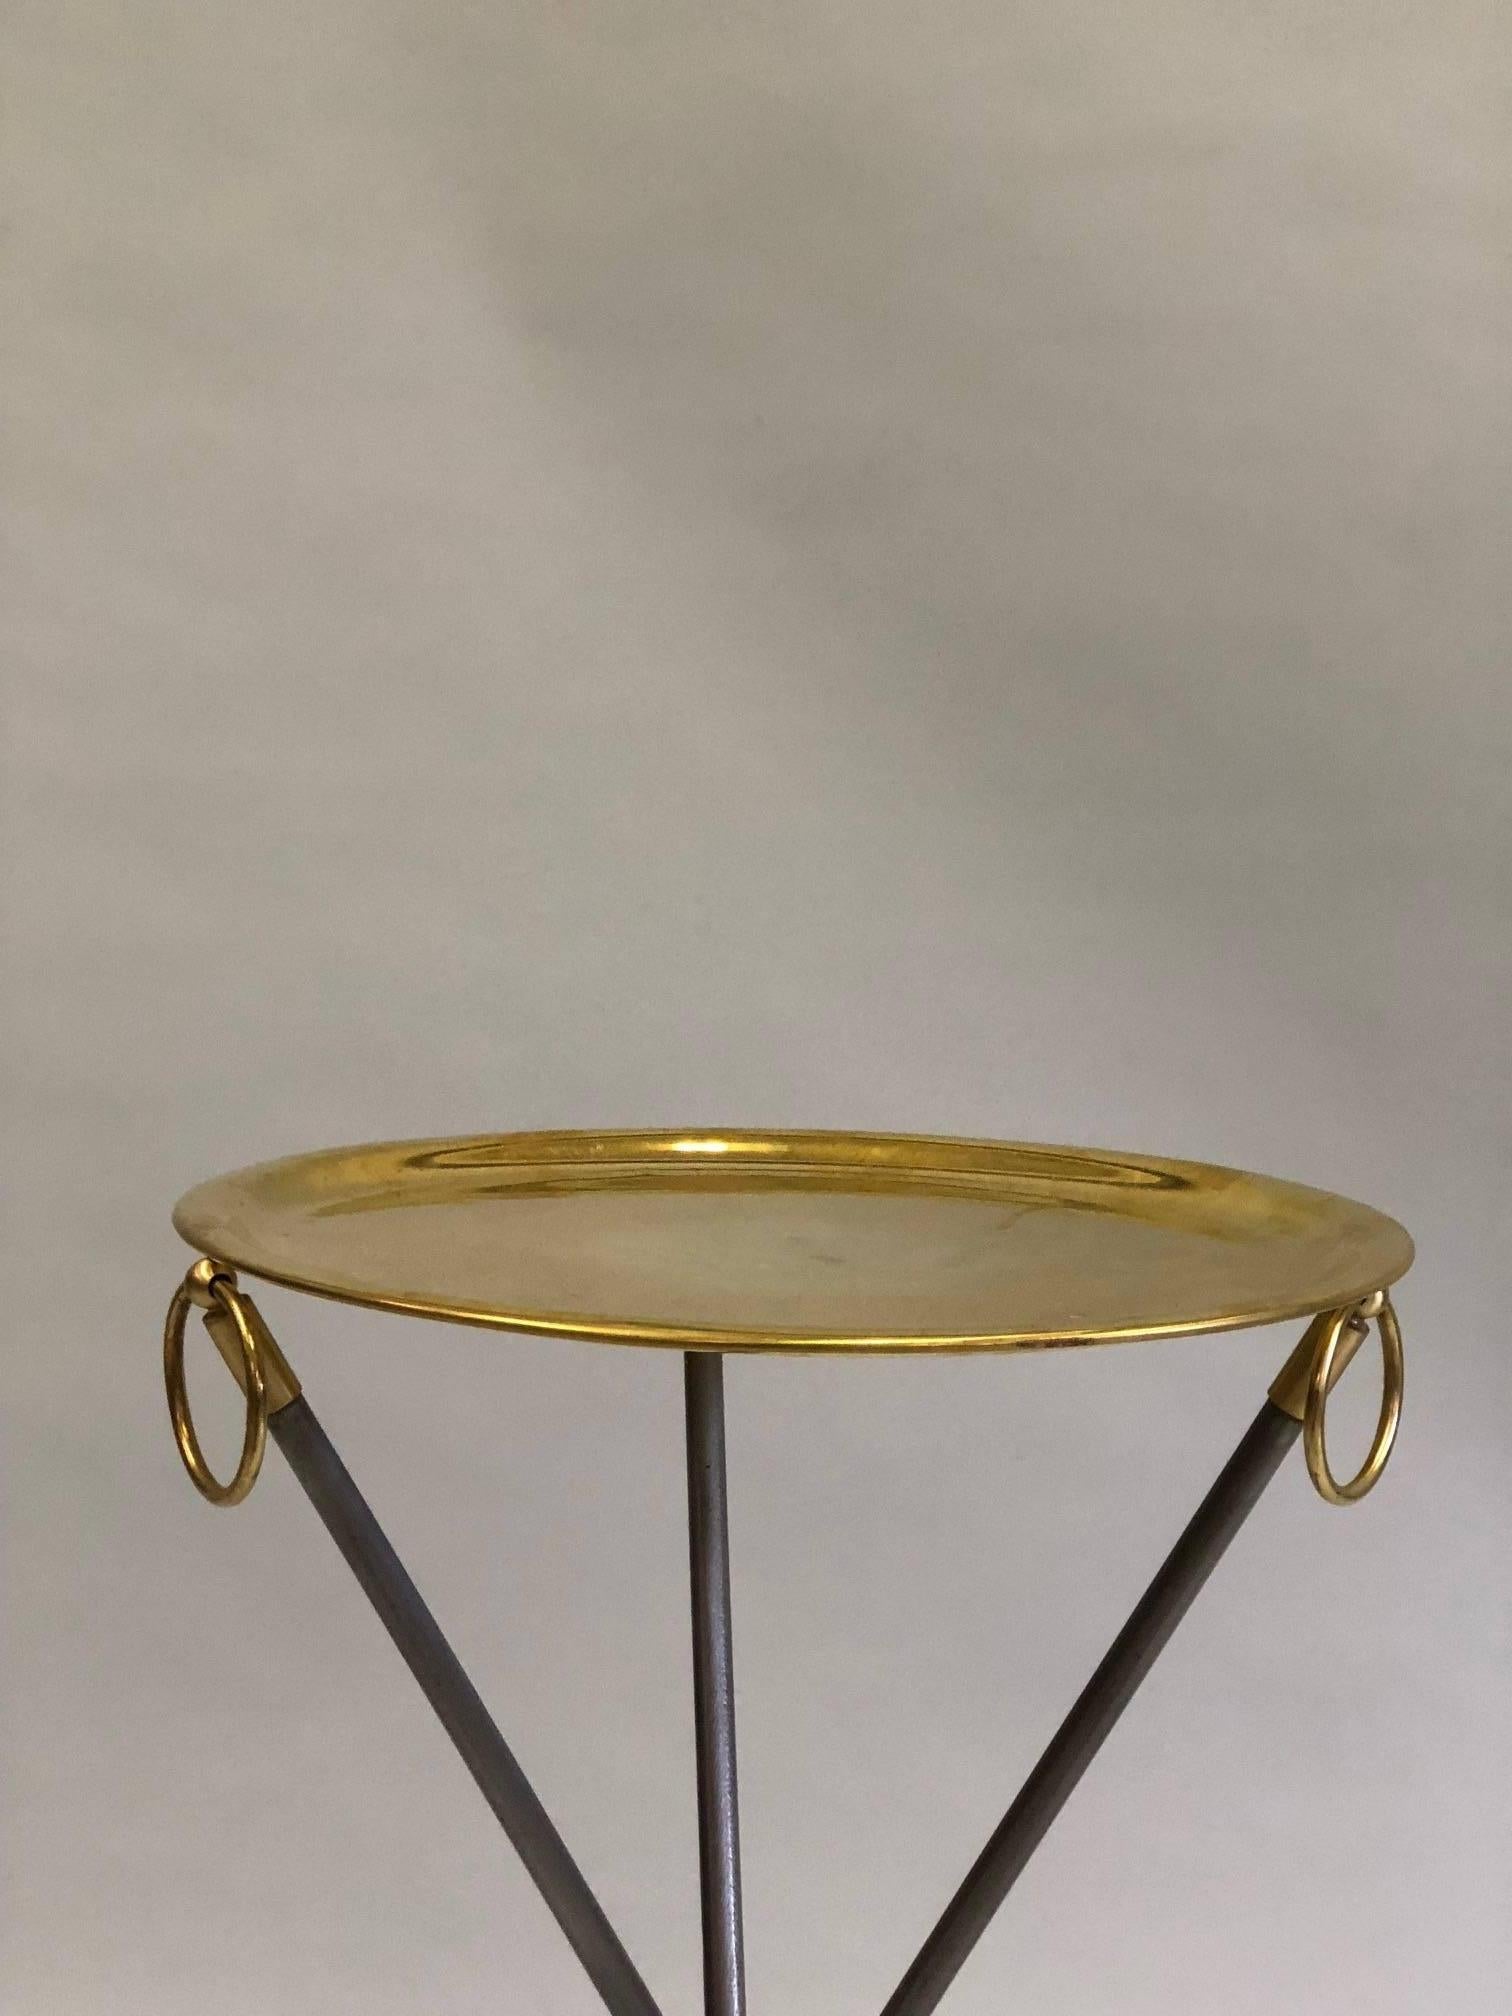 Pair of French Mid-Century Modern Steel and Brass Side Tables by Maison Baguès 1